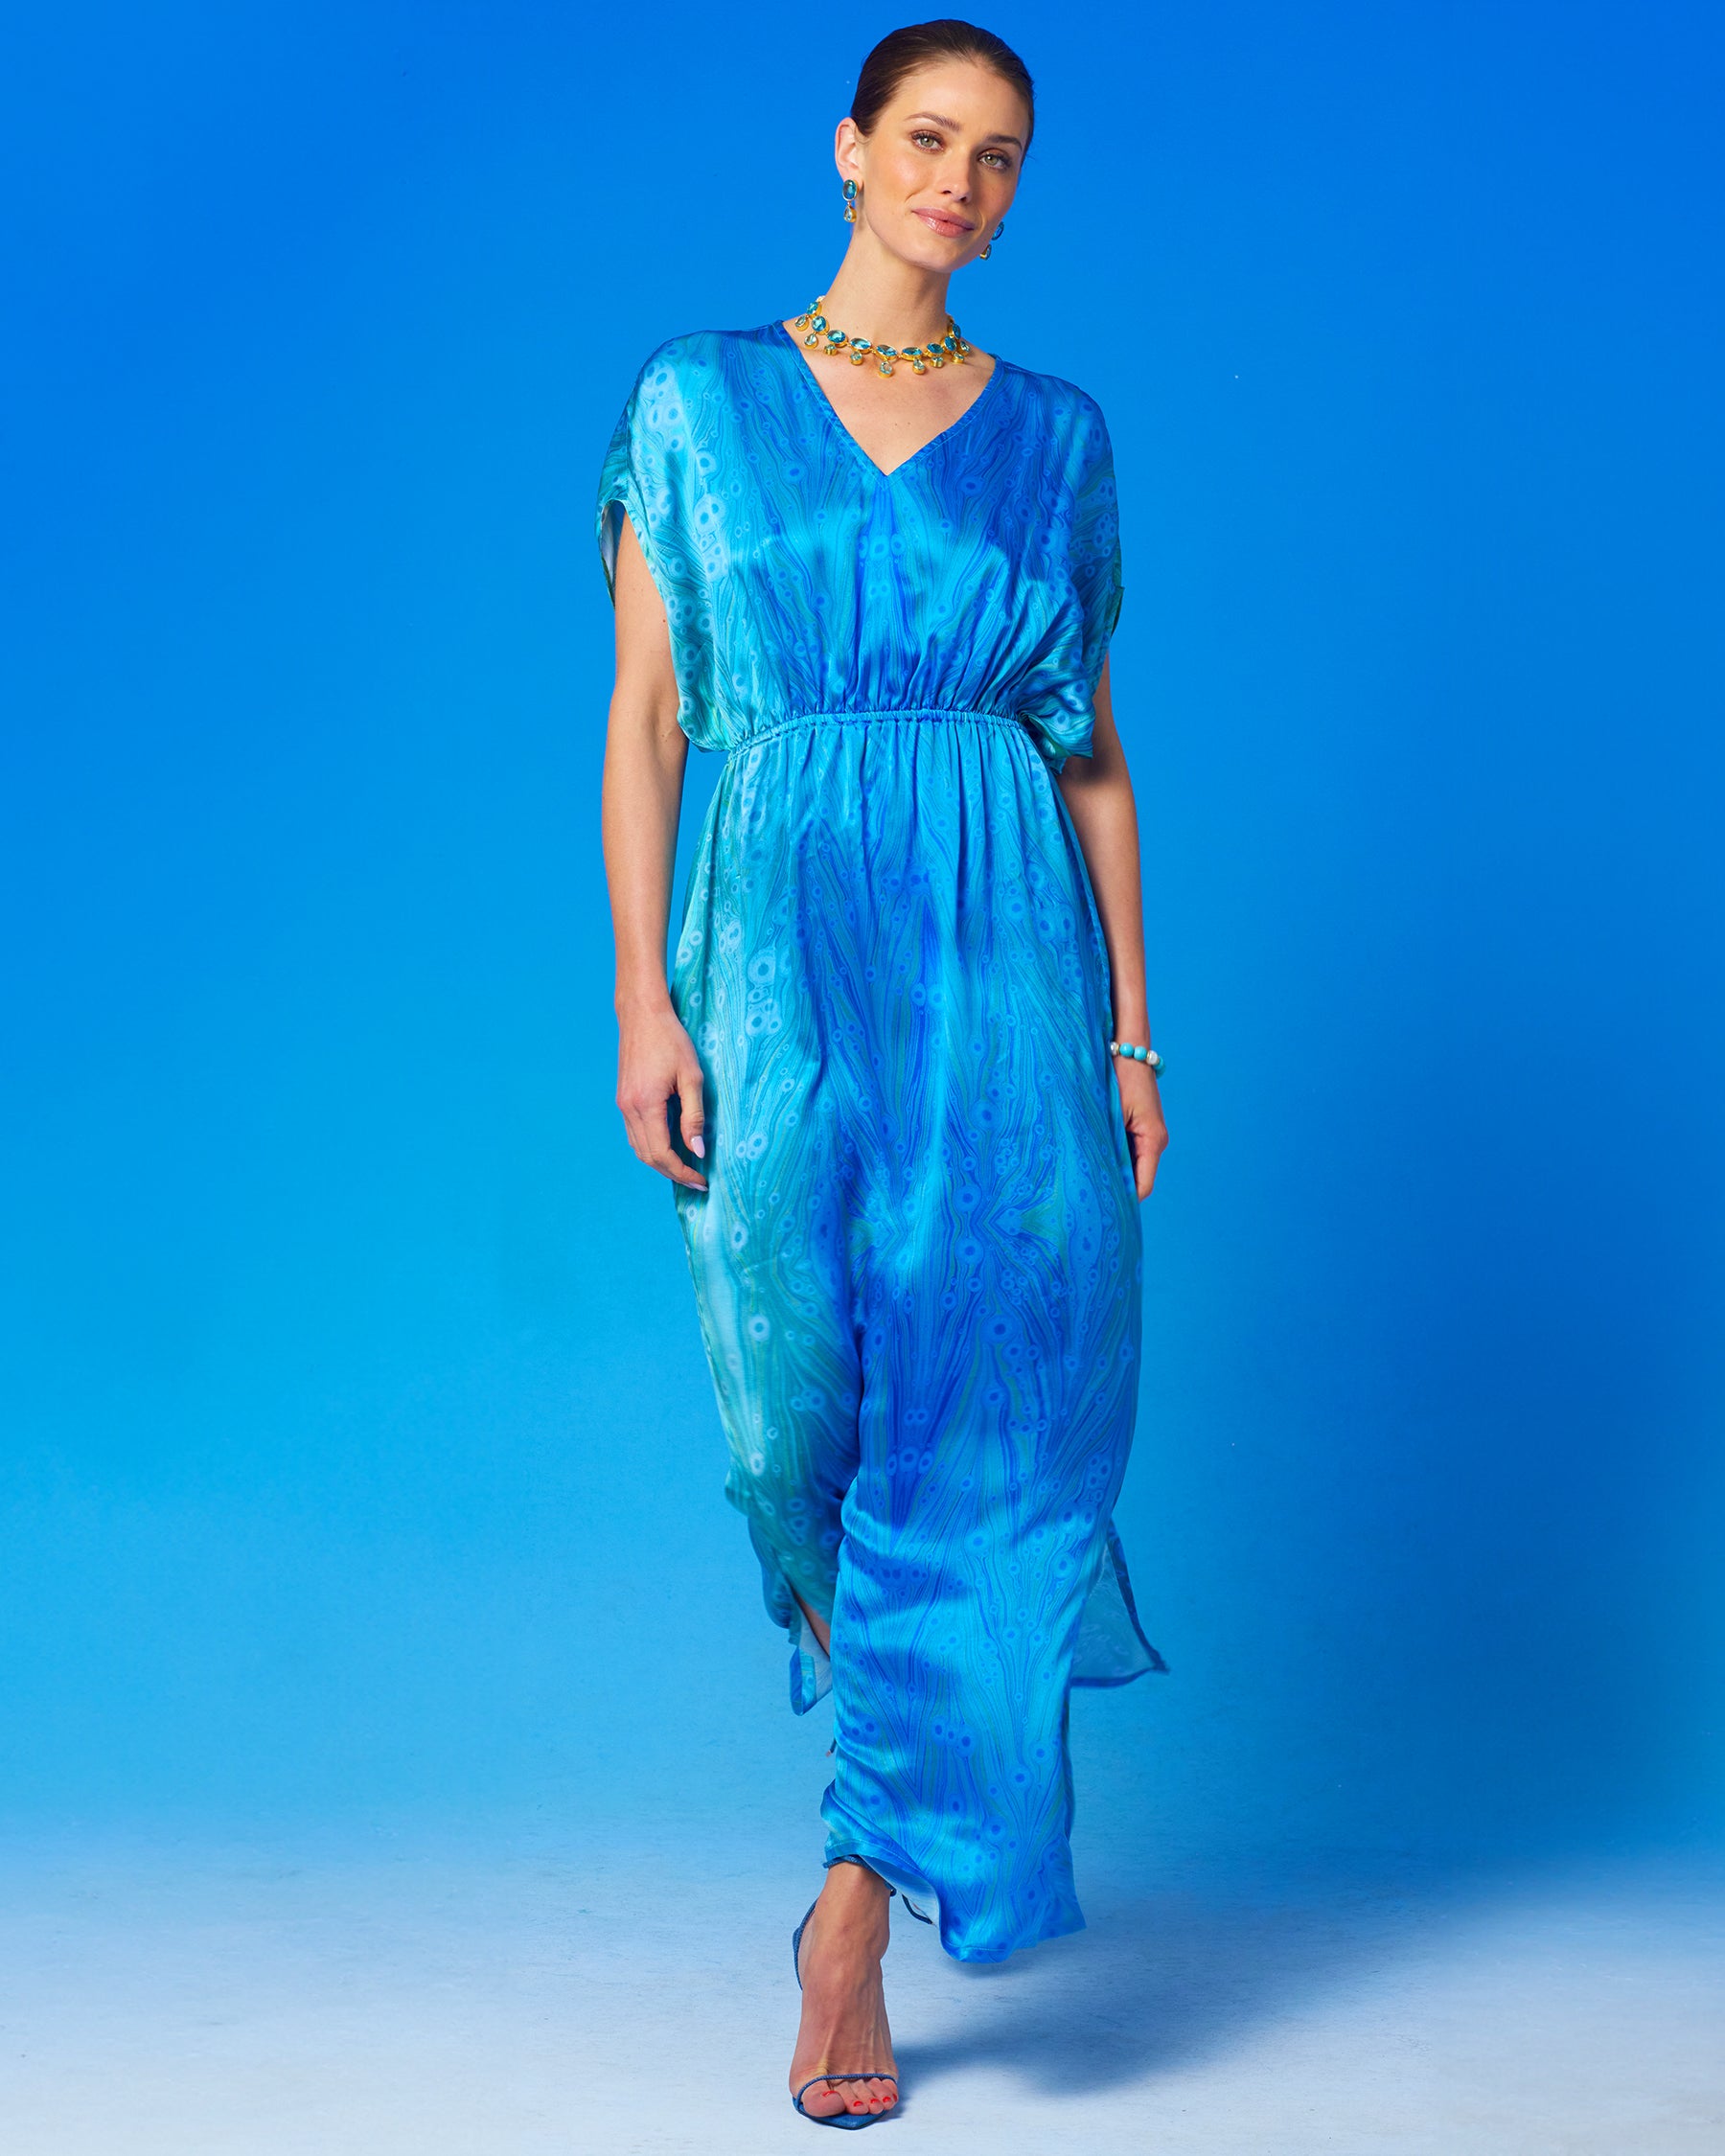 Calliope Long Silk Dress in Sea Nymph Blues front view walking